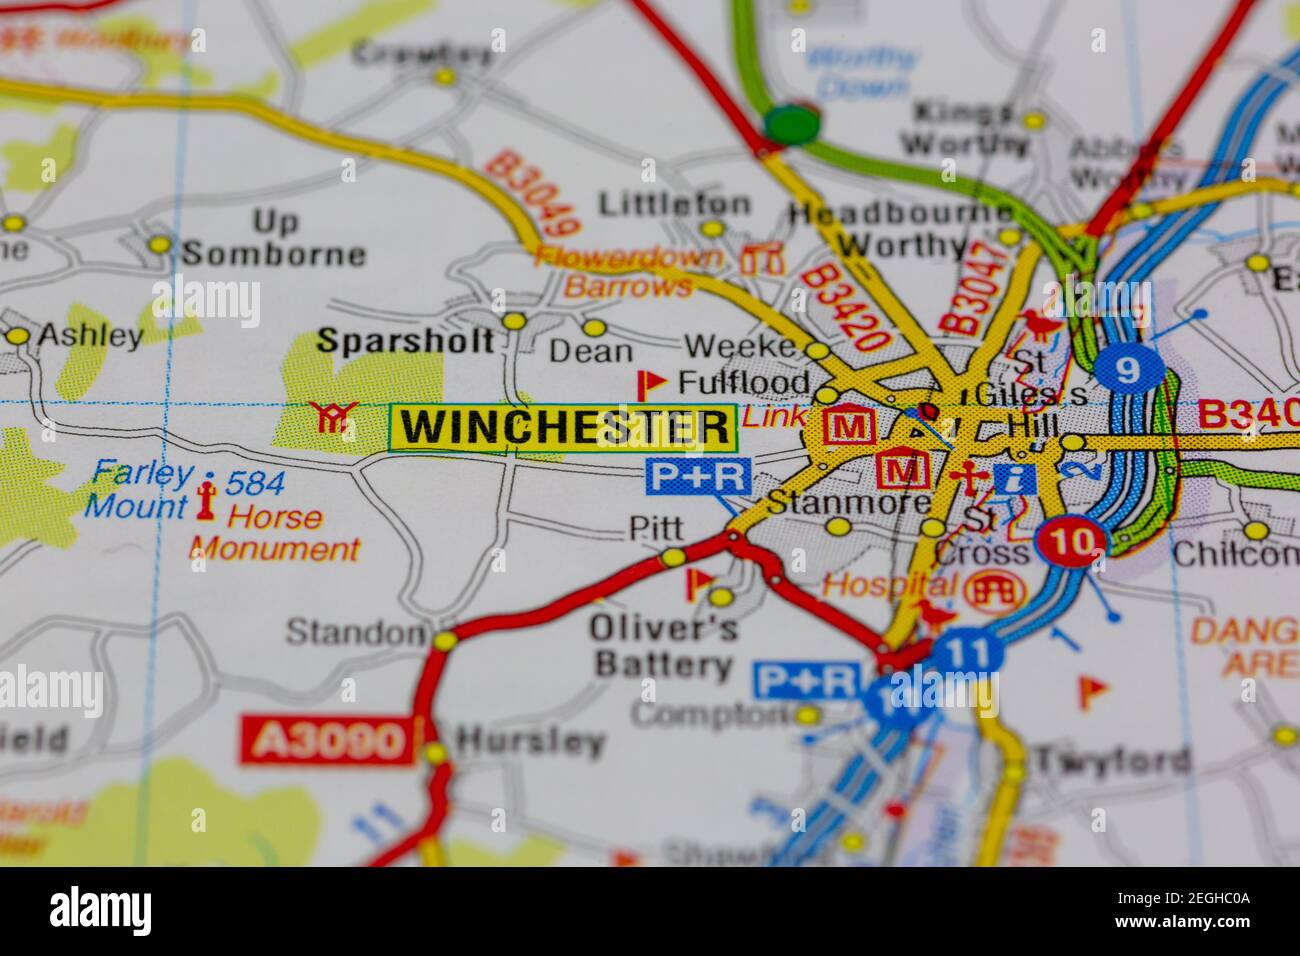 Winchester and surrounding areas shown on a road map or geography map Stock Photo